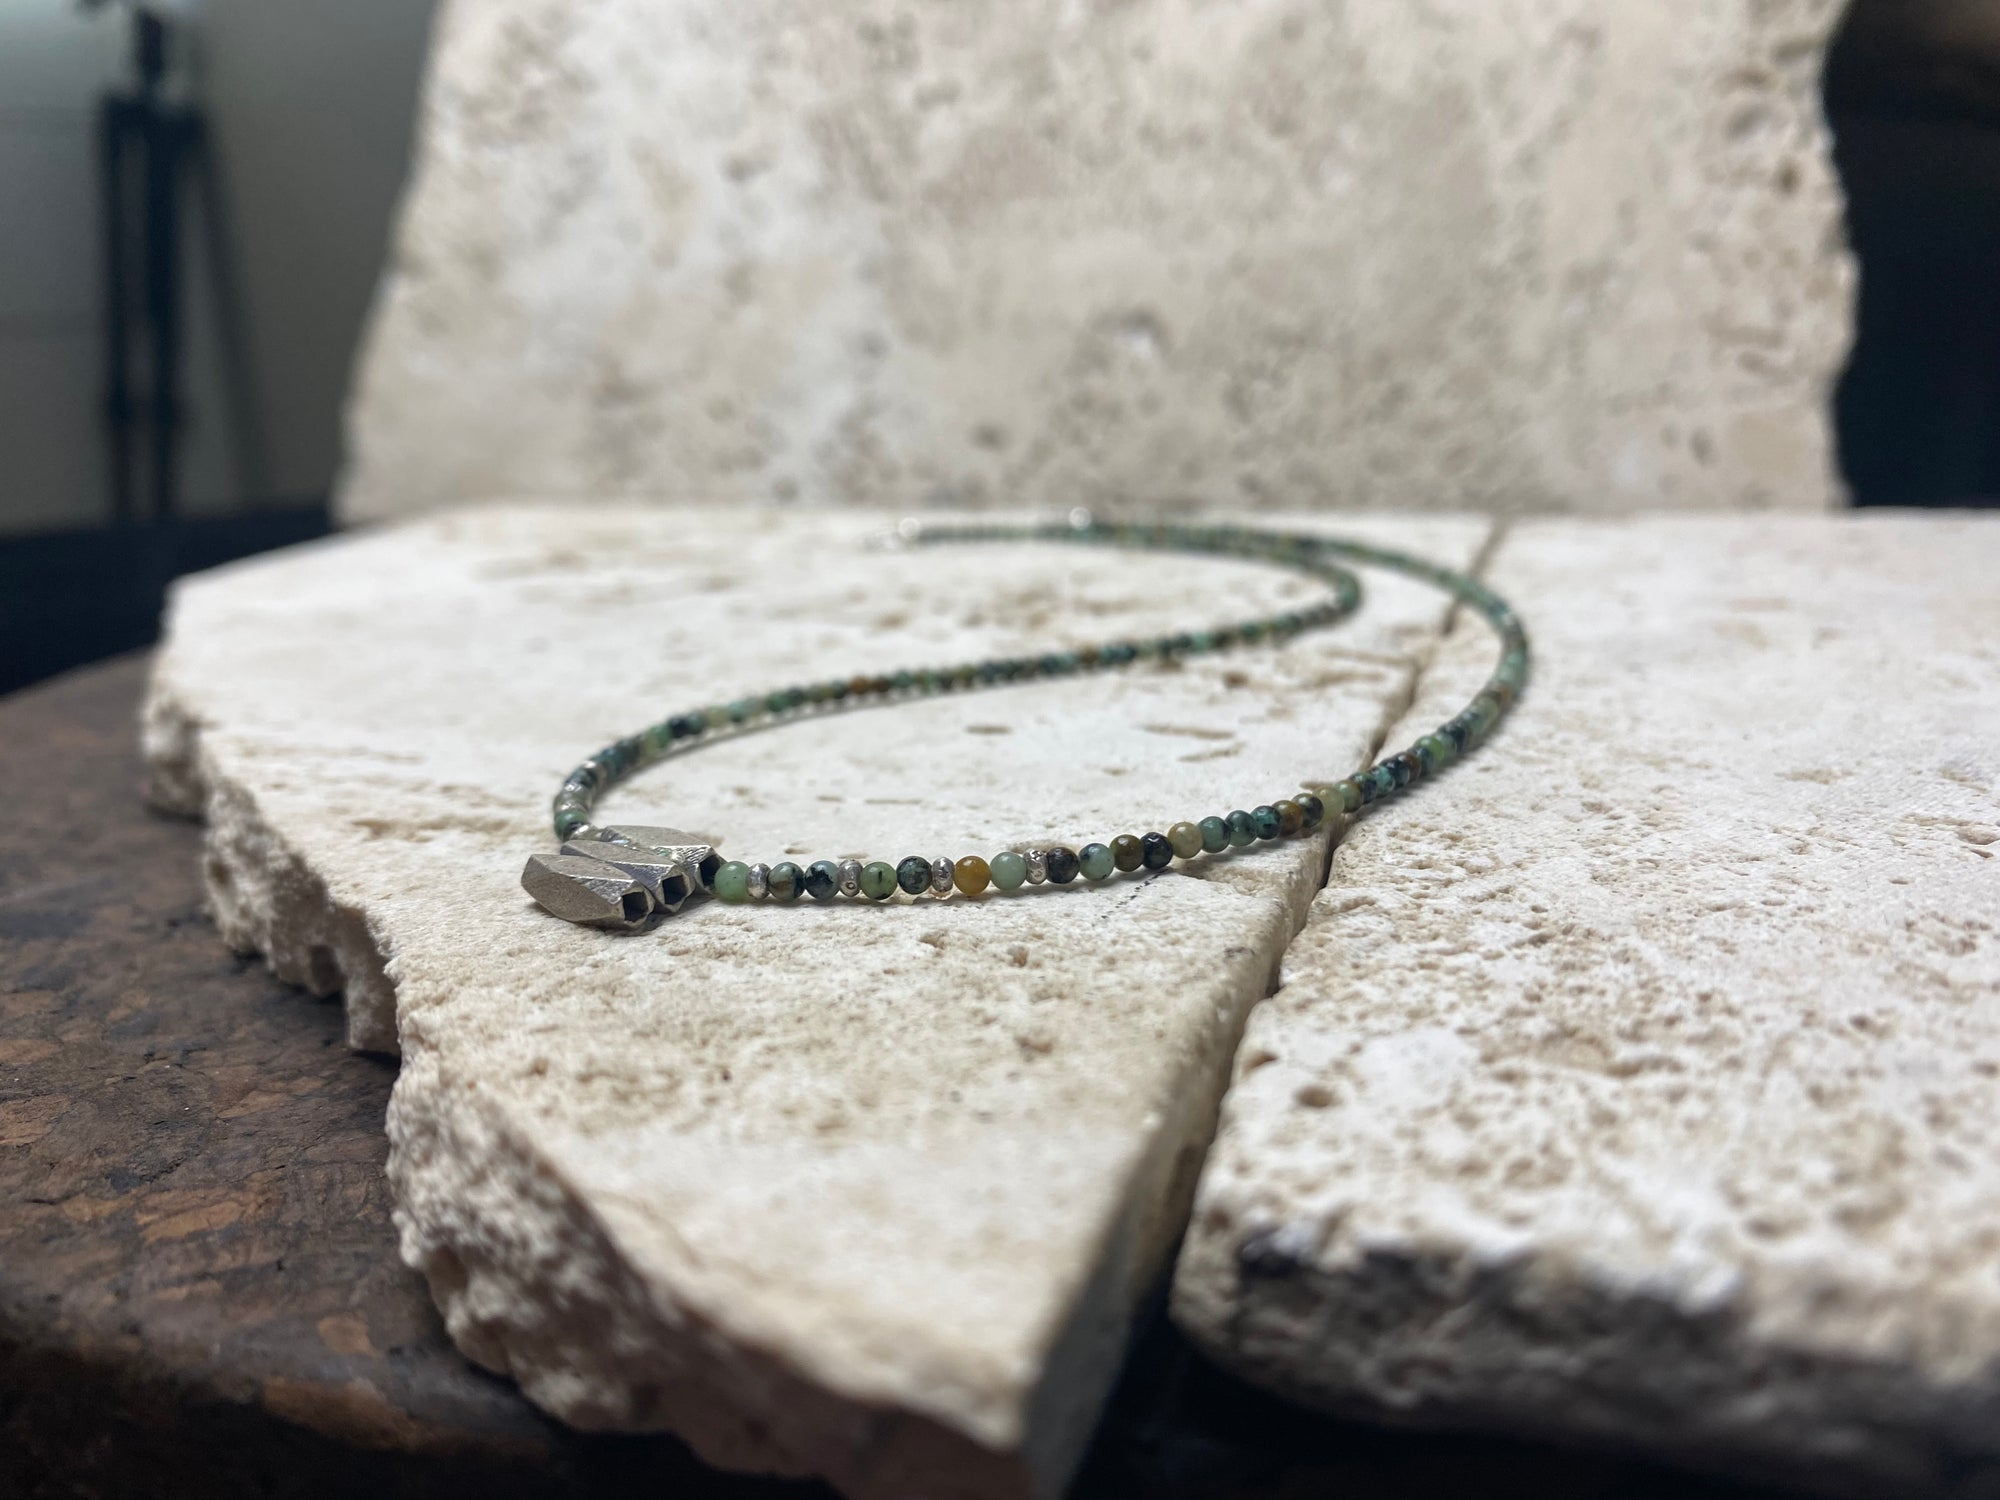 Very fine stone women or mens necklace made from tiny Ethiopian opal beads, highlighted with Karen silver "eye beads" and tribal pendant. The effect is simple, understated and stunning. Finished with sterling silver findings and clasp. A unisex necklace. Length 46.5 cm (18.35")